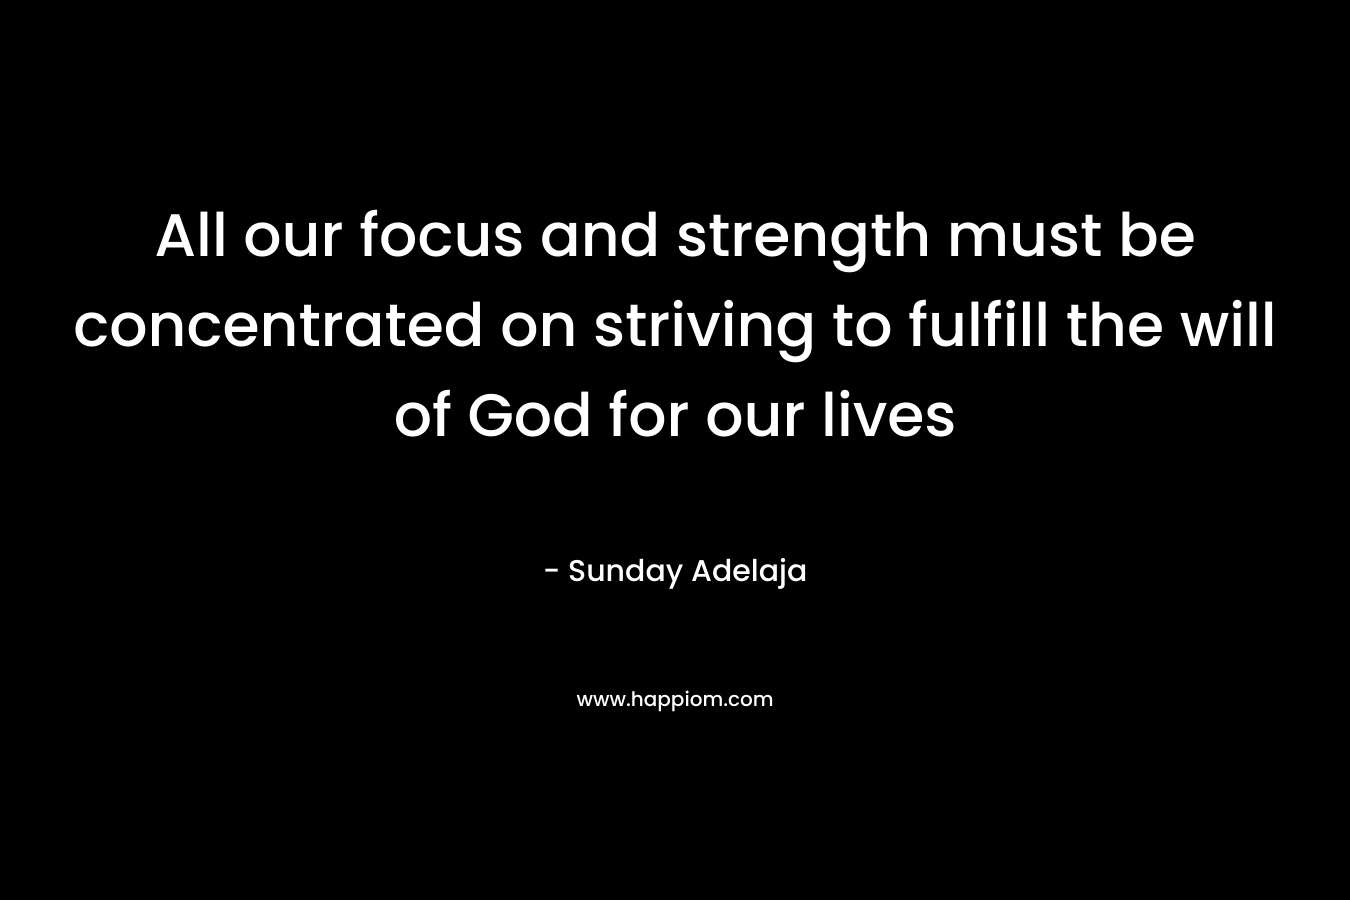 All our focus and strength must be concentrated on striving to fulfill the will of God for our lives – Sunday Adelaja